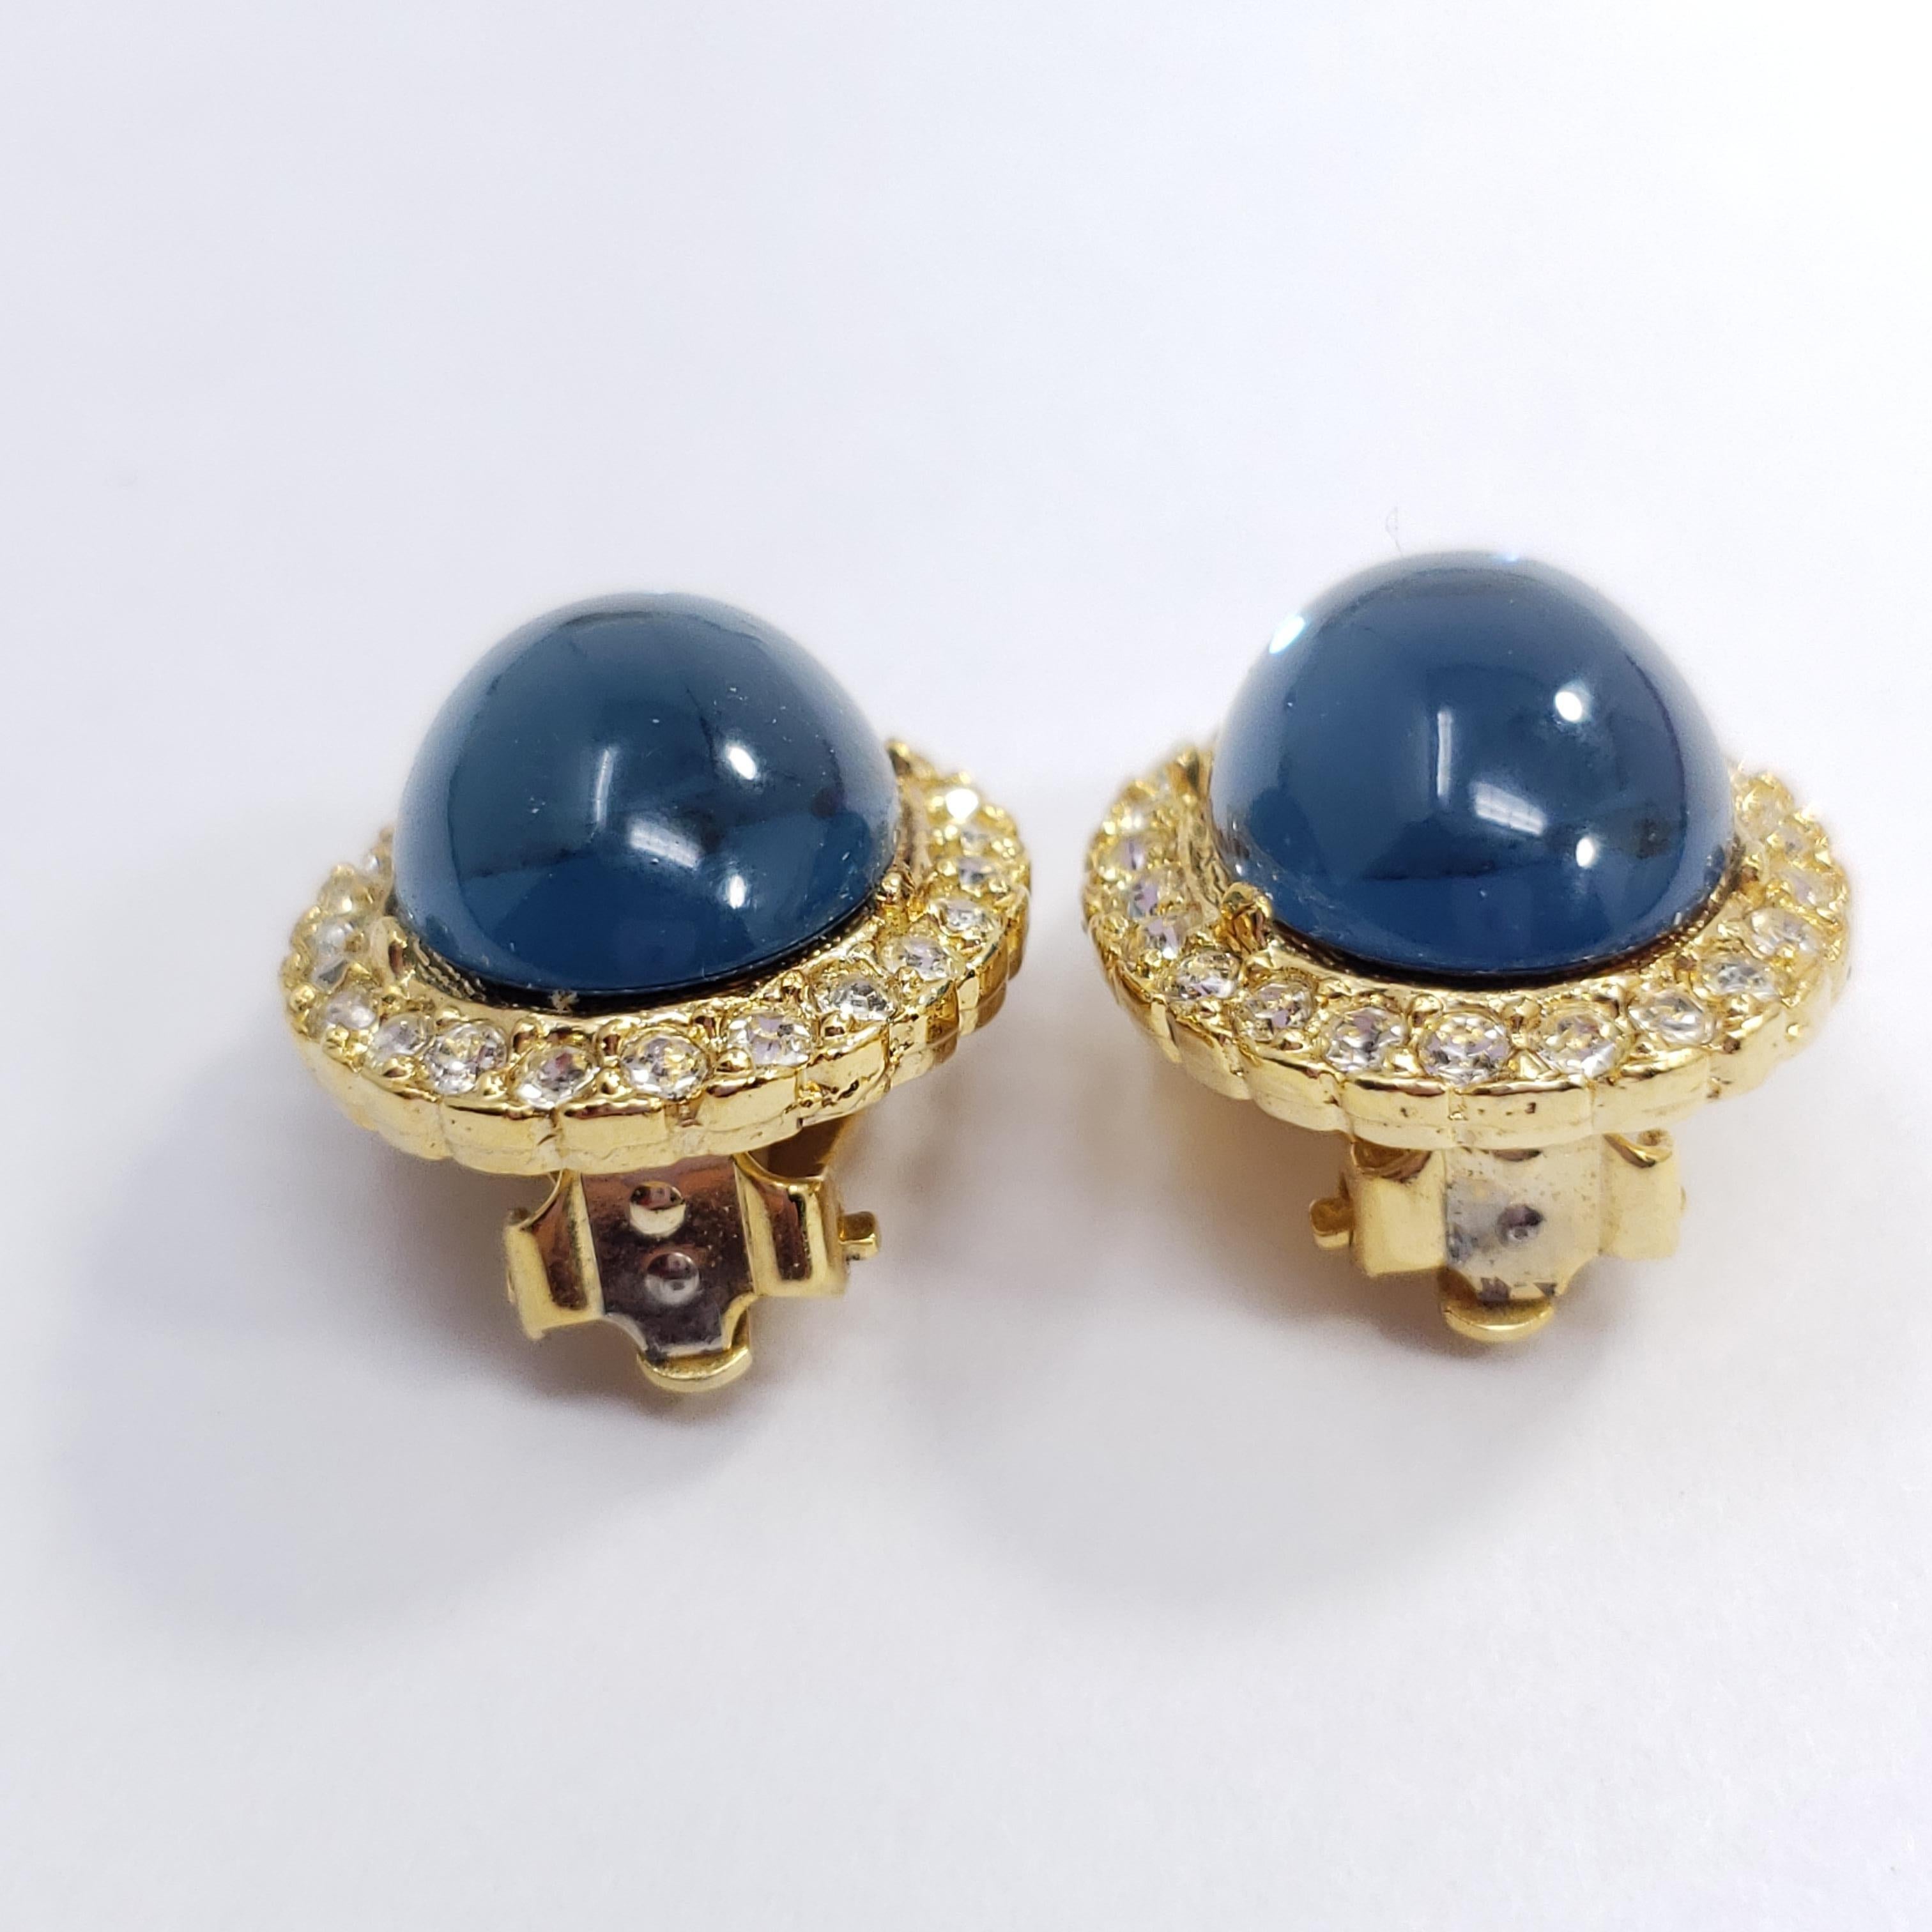 A pair of  exquisite clip on earrings, each featuring a single, royal, sapphire-blue cabochon accented with smaller crystals, set on a golden clip.

Gold-filled. Made in the USA. Circa mid to late 20th century.

Each earring approx. 1 inch by 0.7